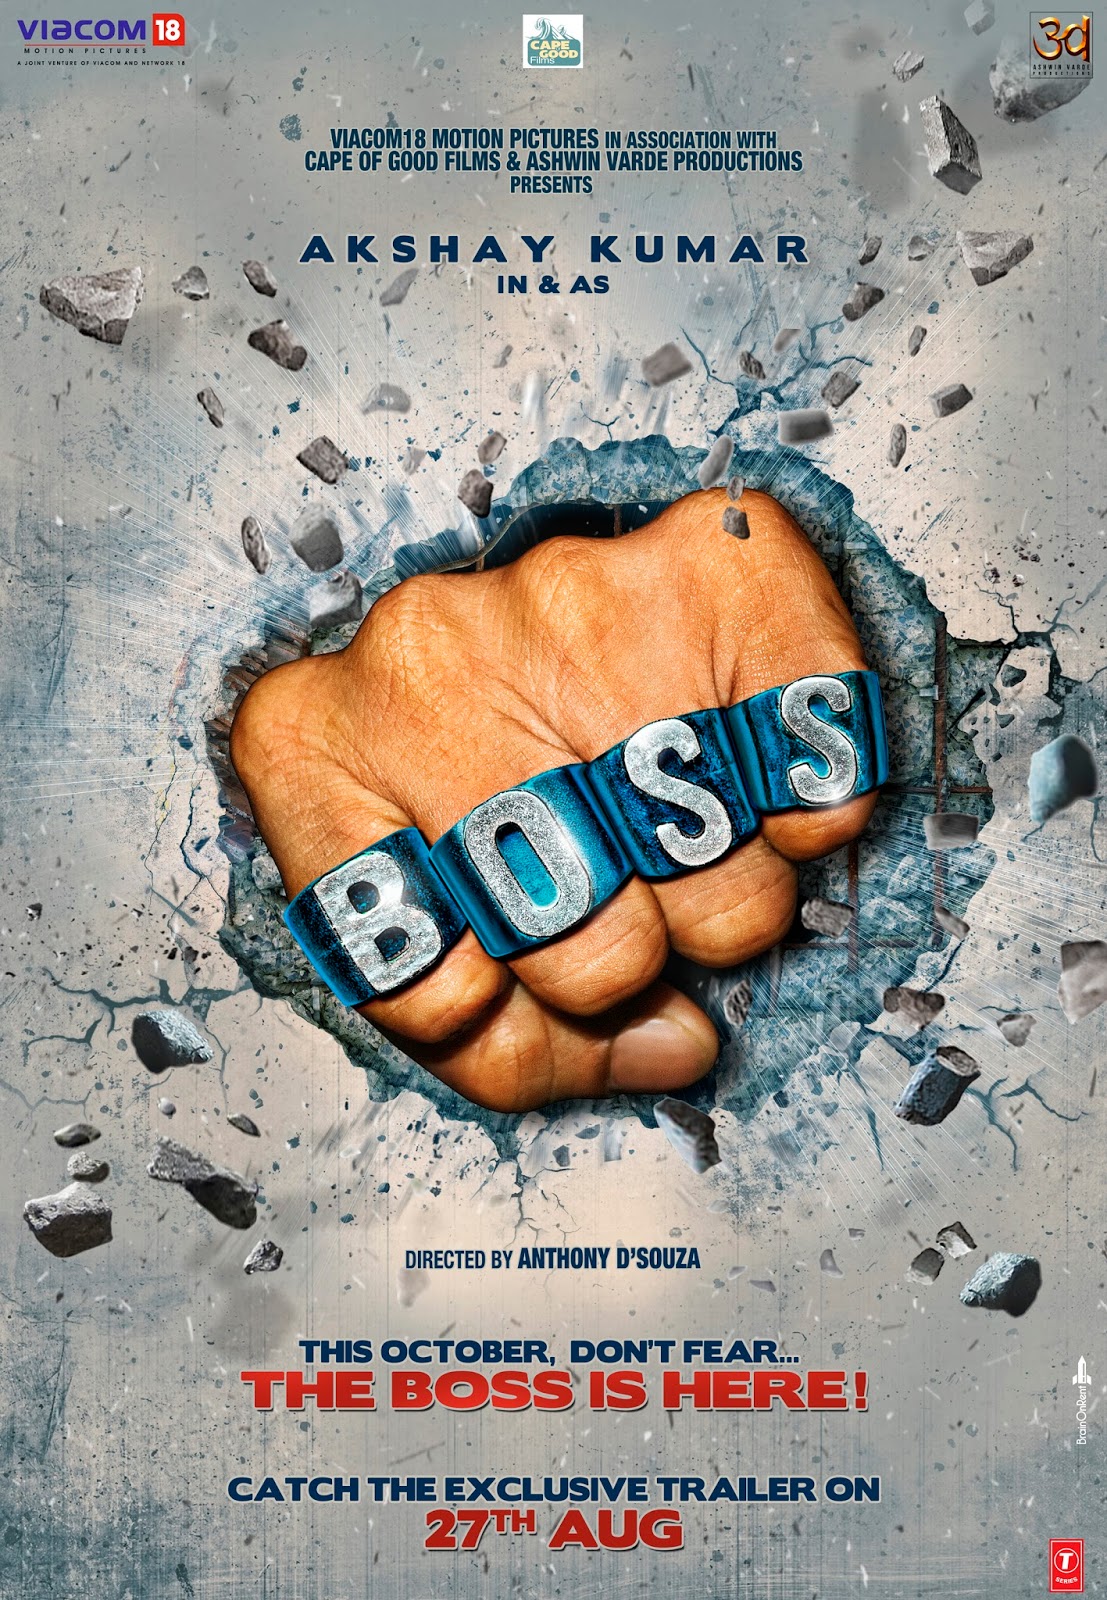 Like A Boss Movie Wallpapers